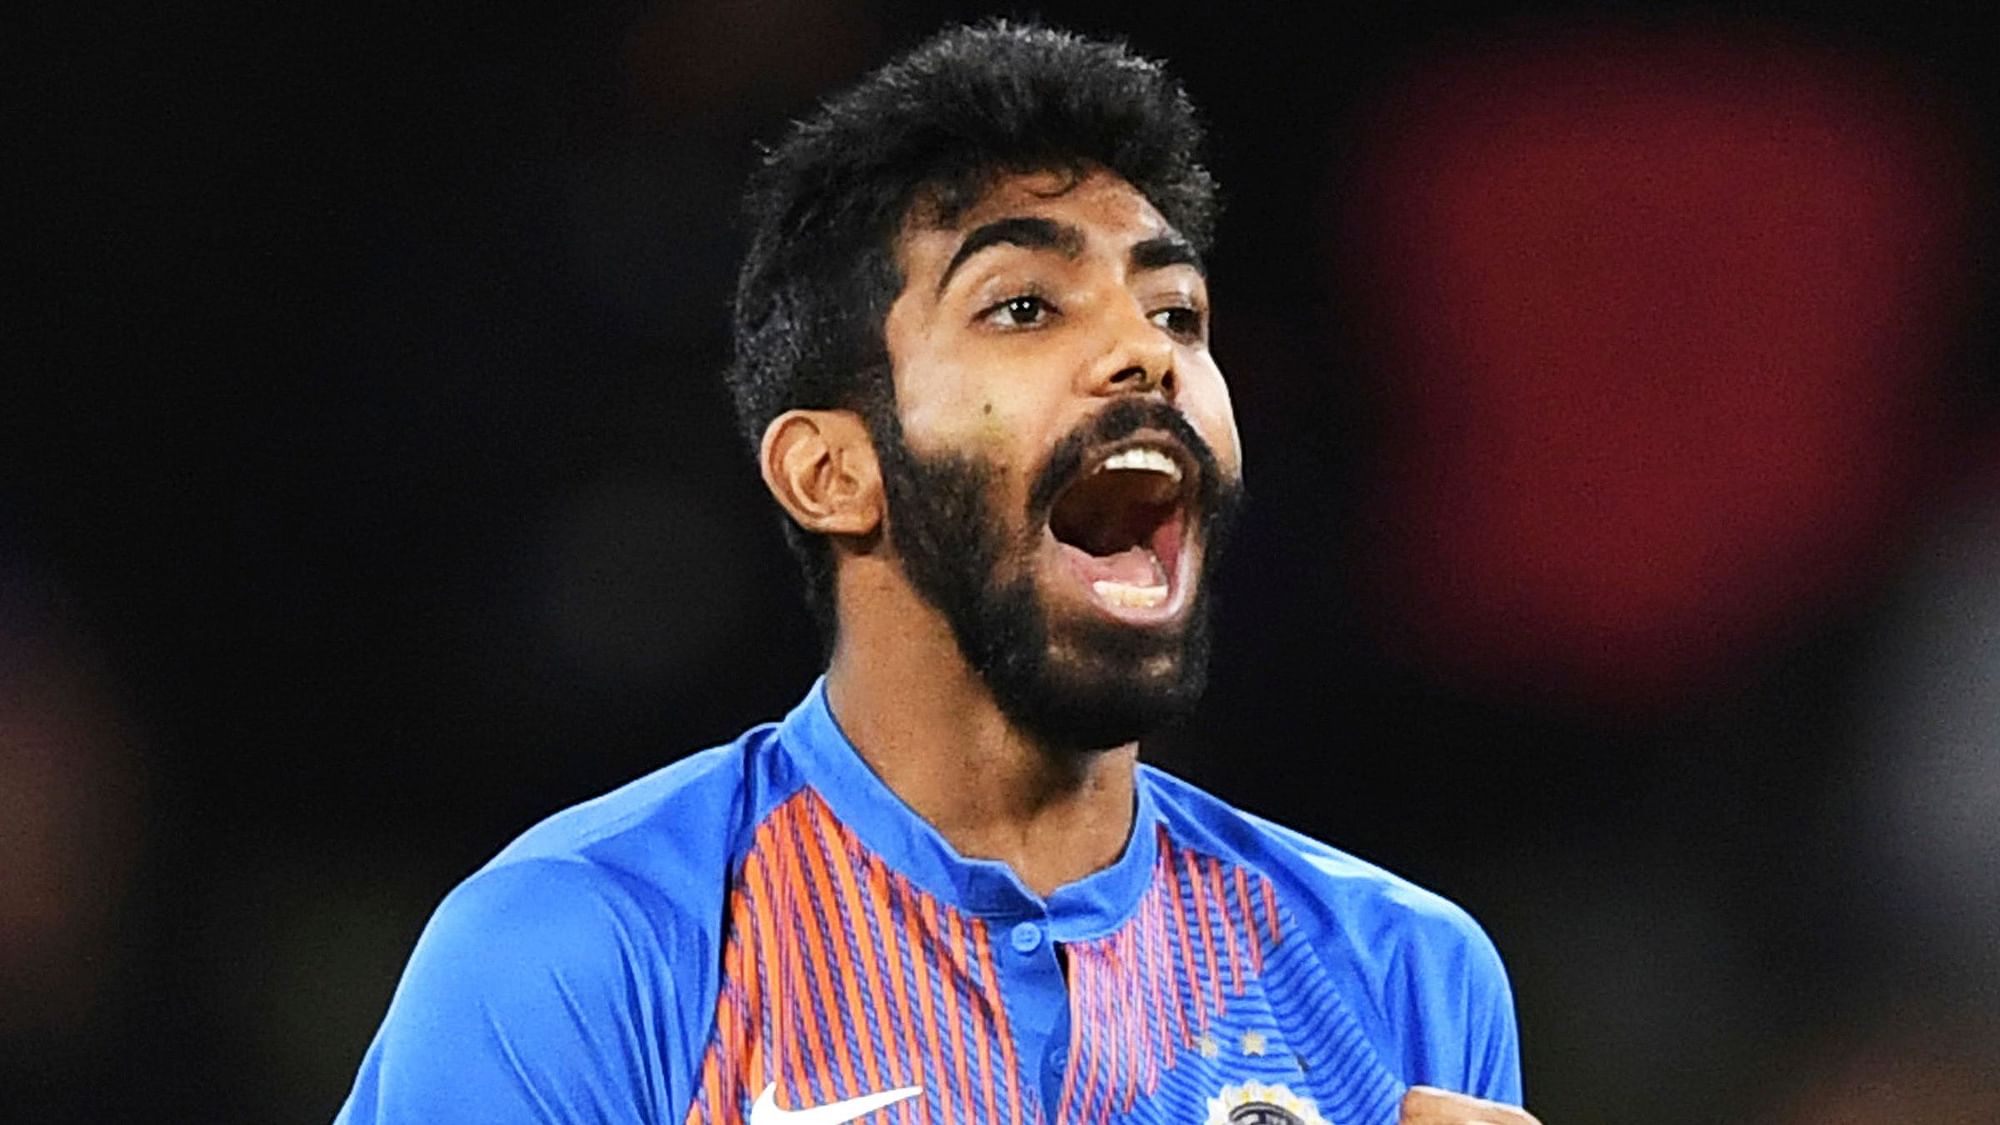 Jasprit Bumrah has picked 2 wickets in 2 matches vs Australia in ODIs so far, conceding 152 runs.